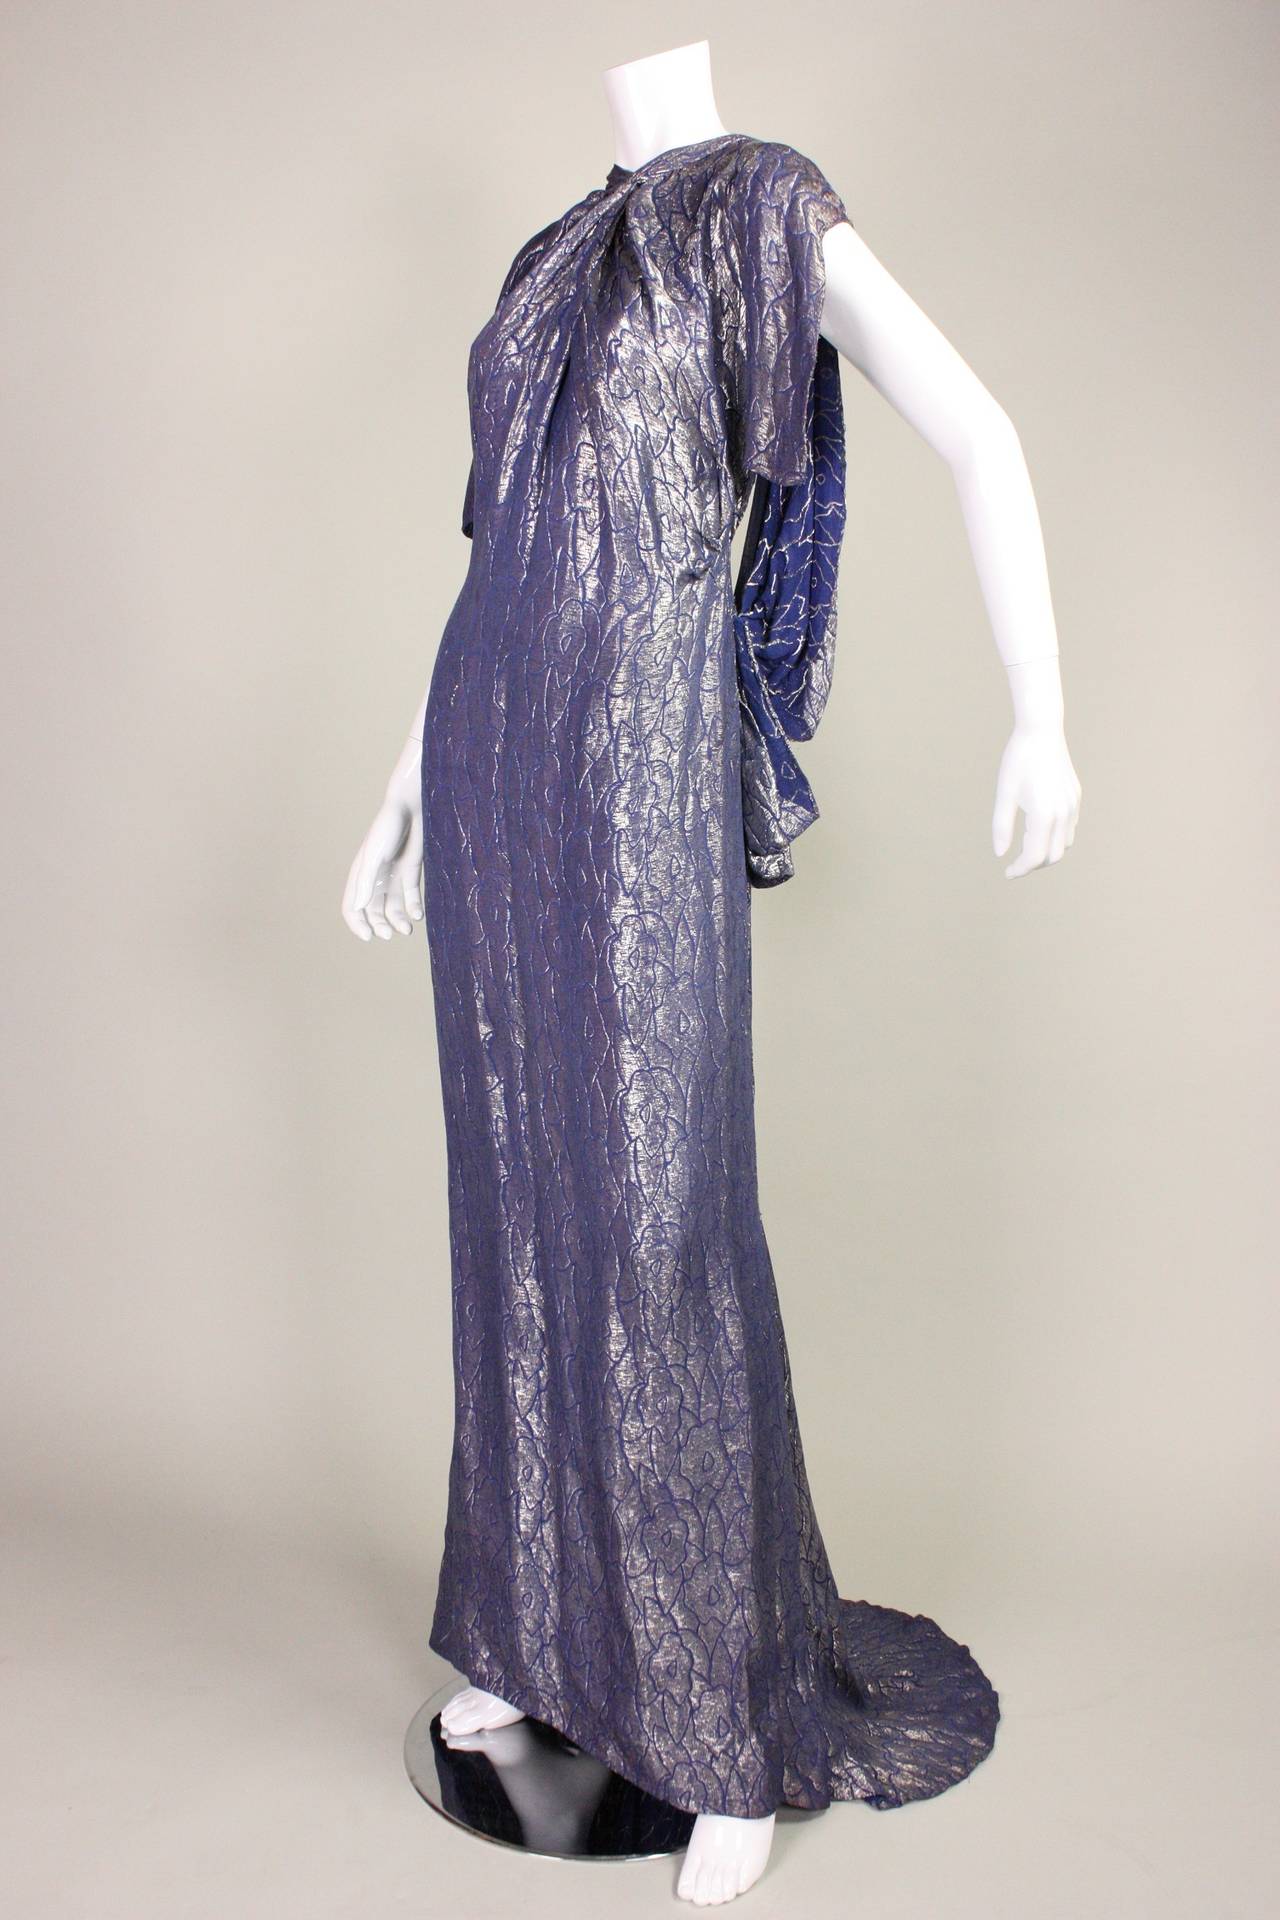 Gray 1930's Art Deco Lamé Gown with Train